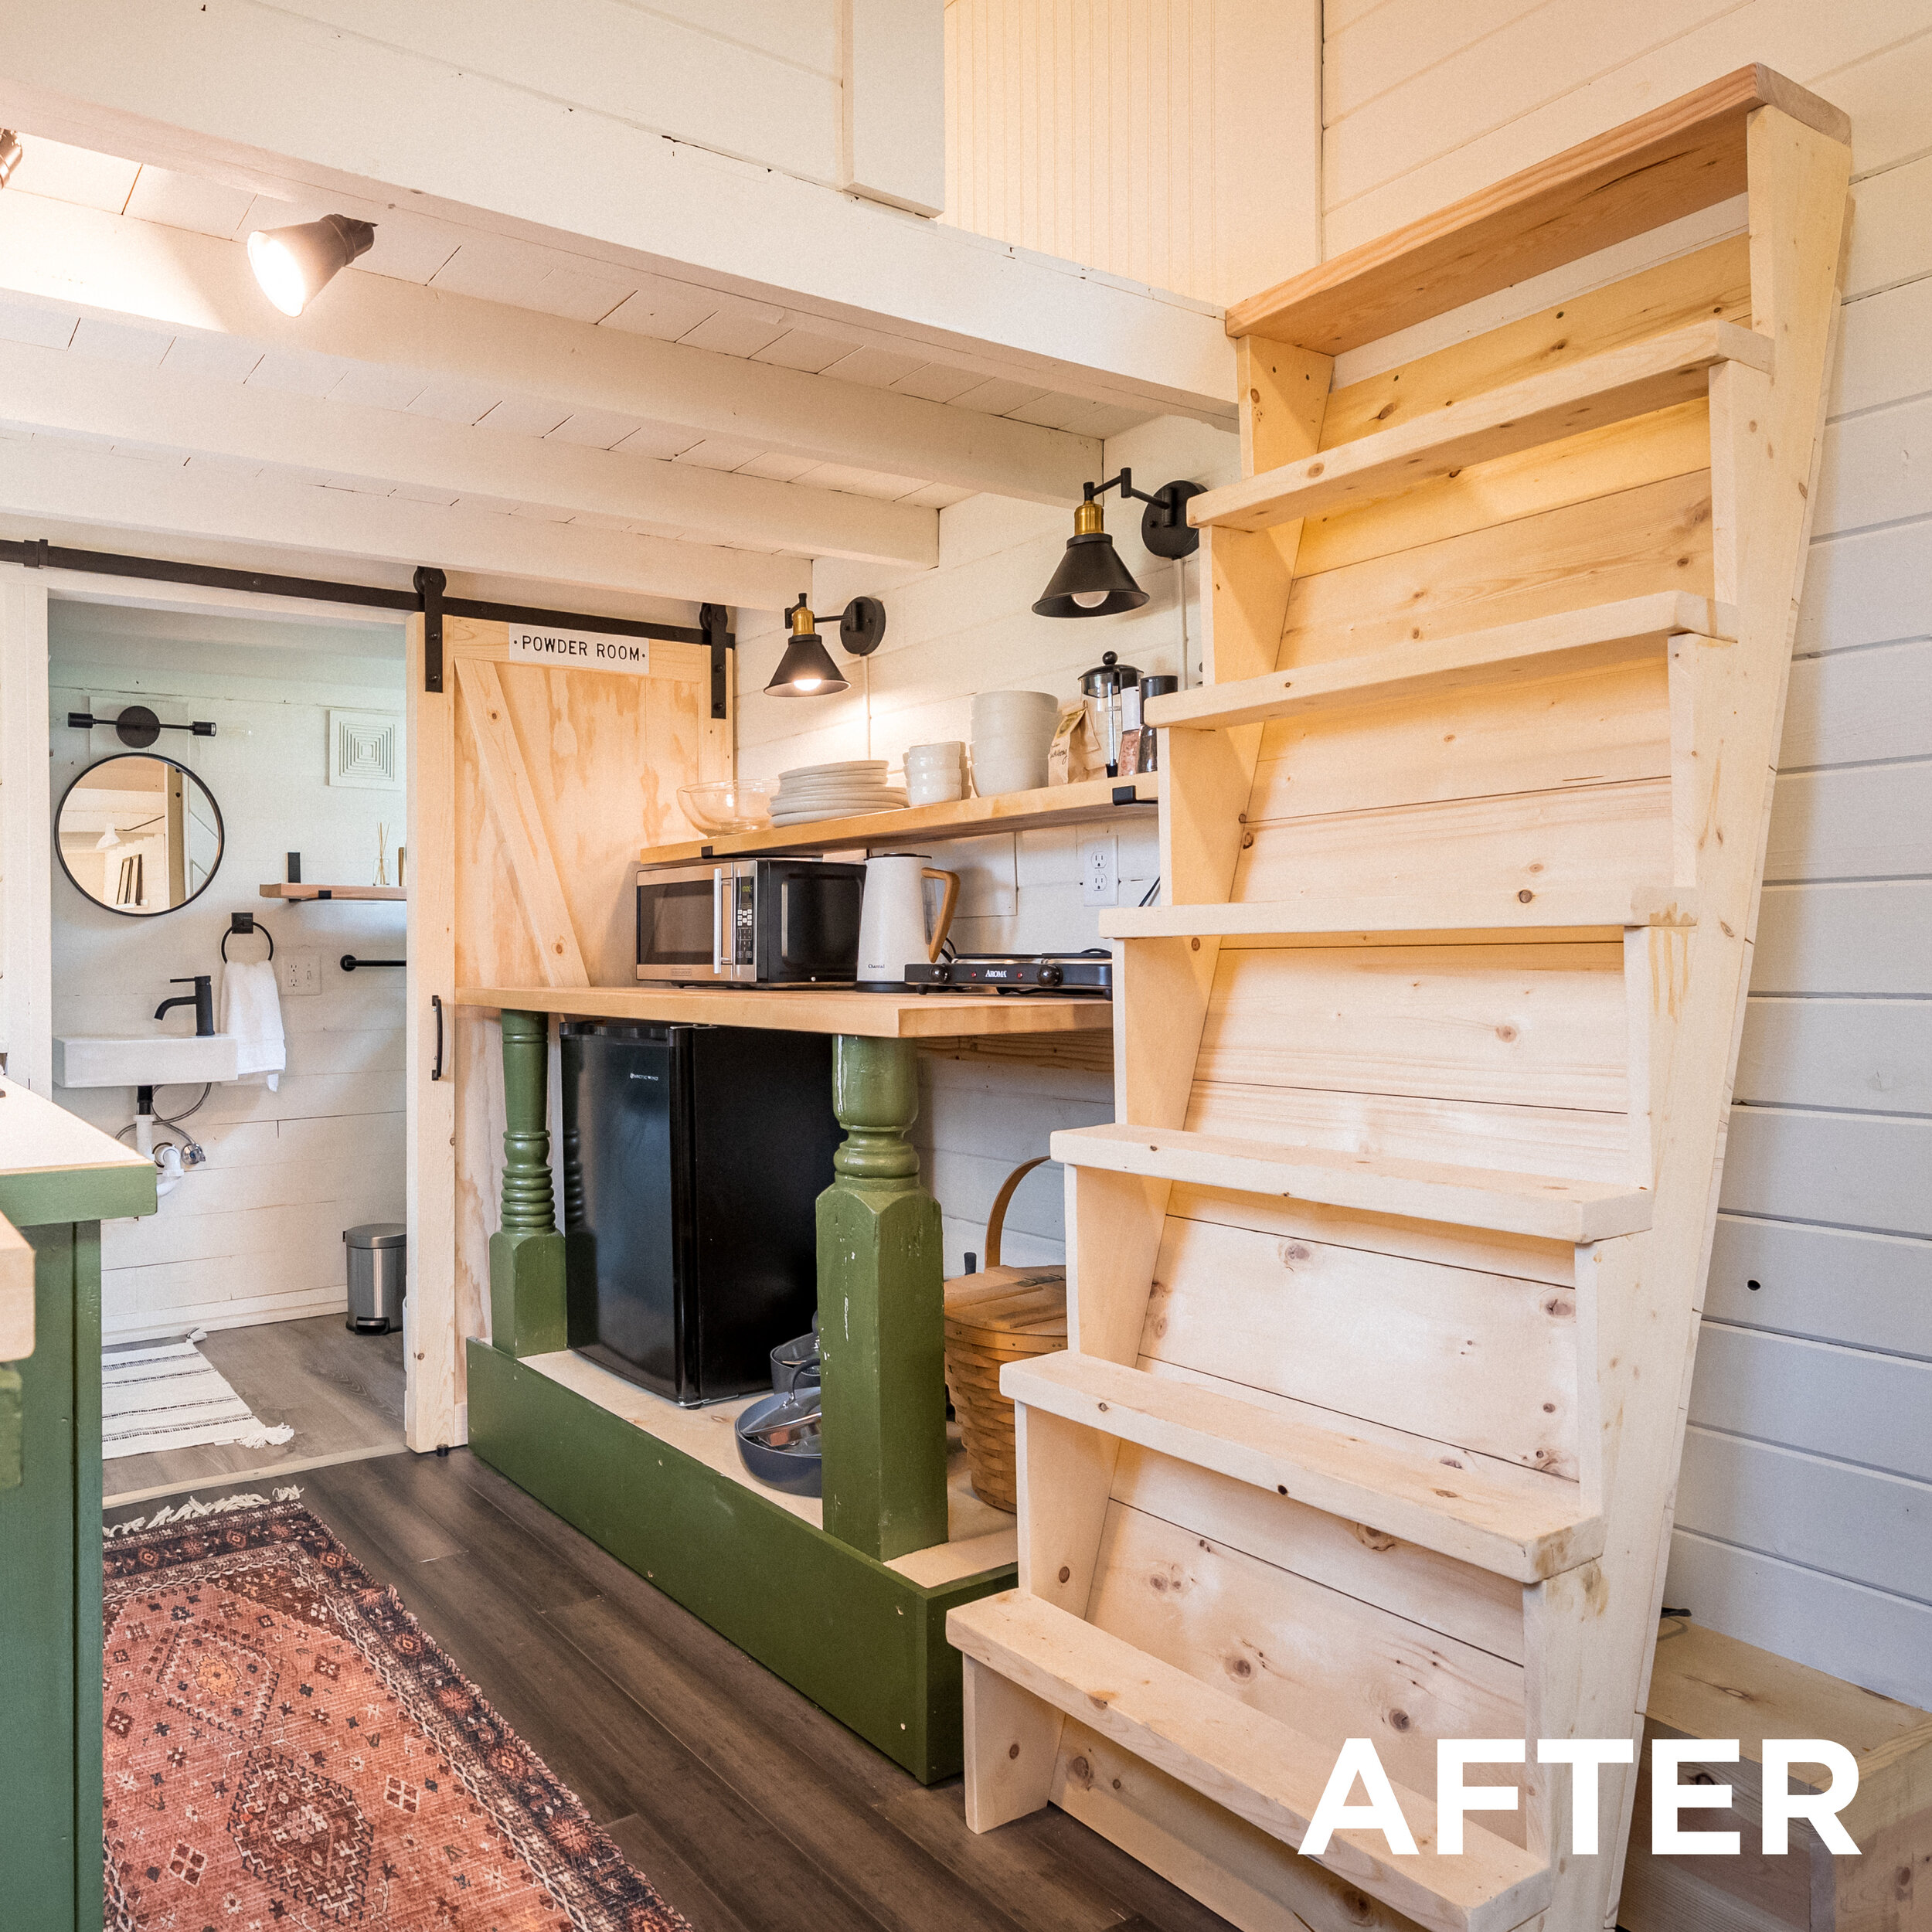 BEFORE & AFTER MARY TINY HOUSE12.jpg